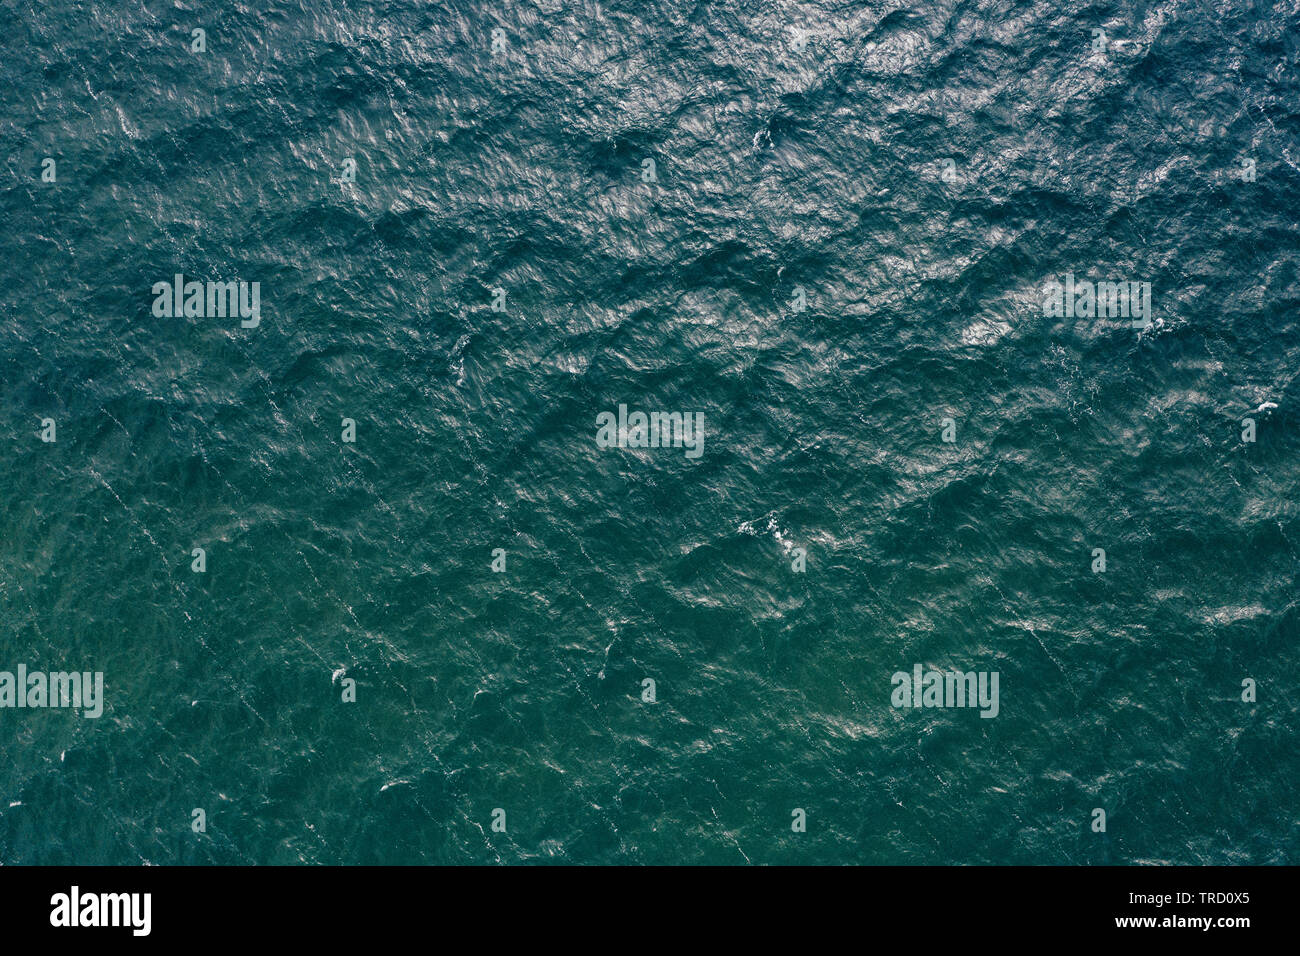 topdown view of the water surface. Stock Photo